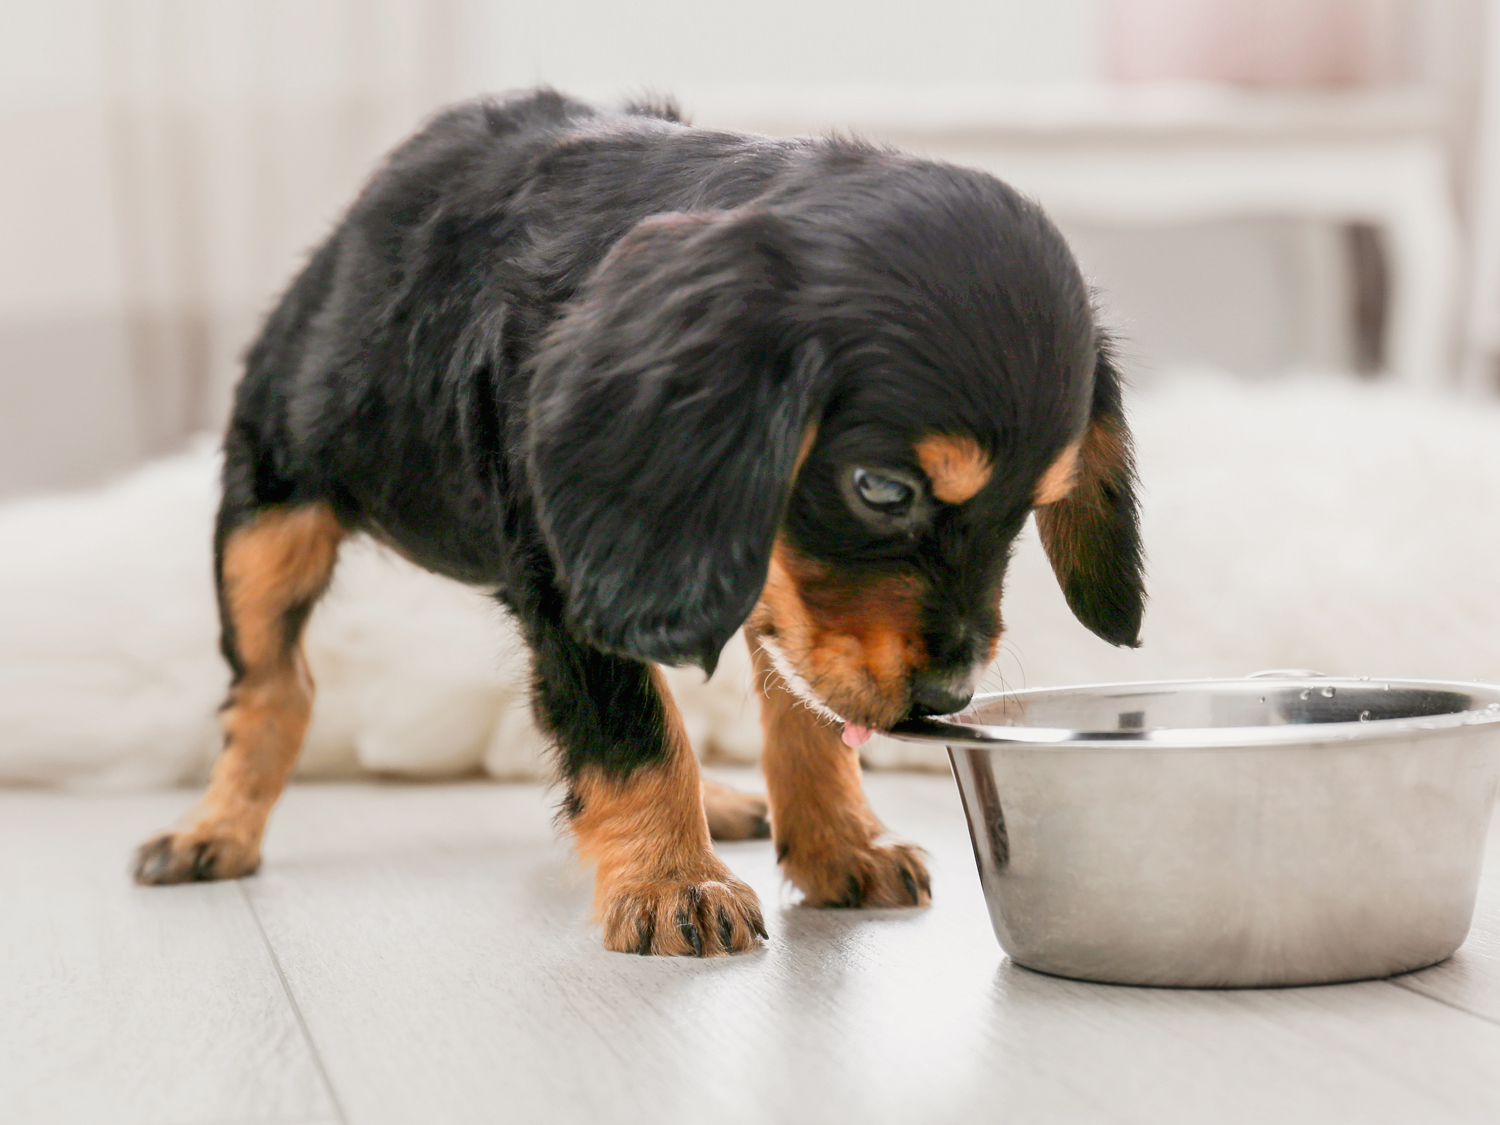 What do I feed my puppy? 3 questions any new dog owner should ask